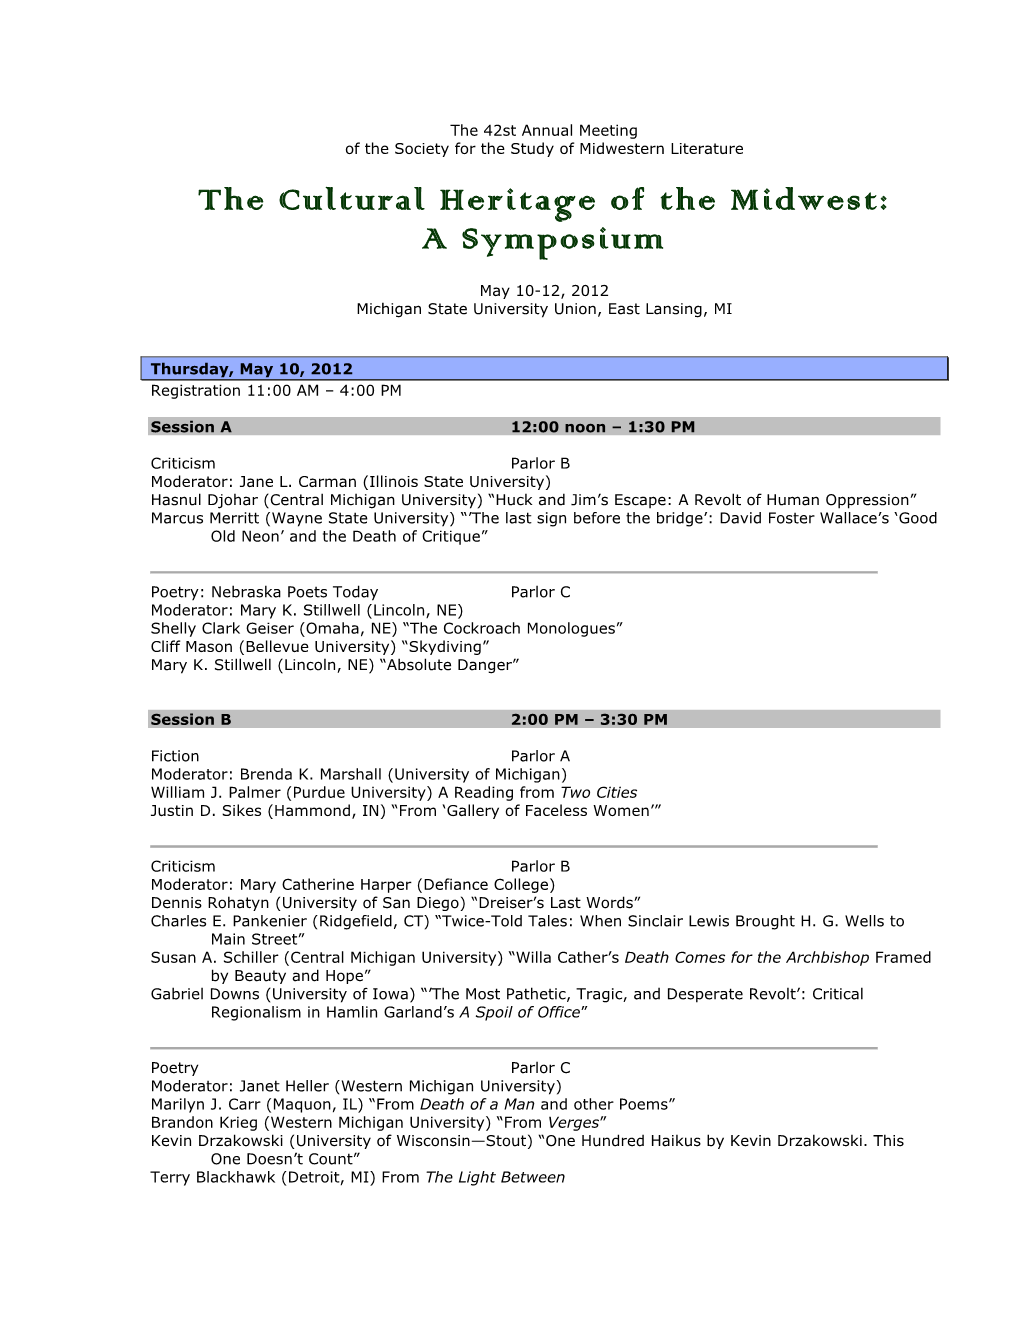 The Cultural Heritage of the Midwest: a Symposium